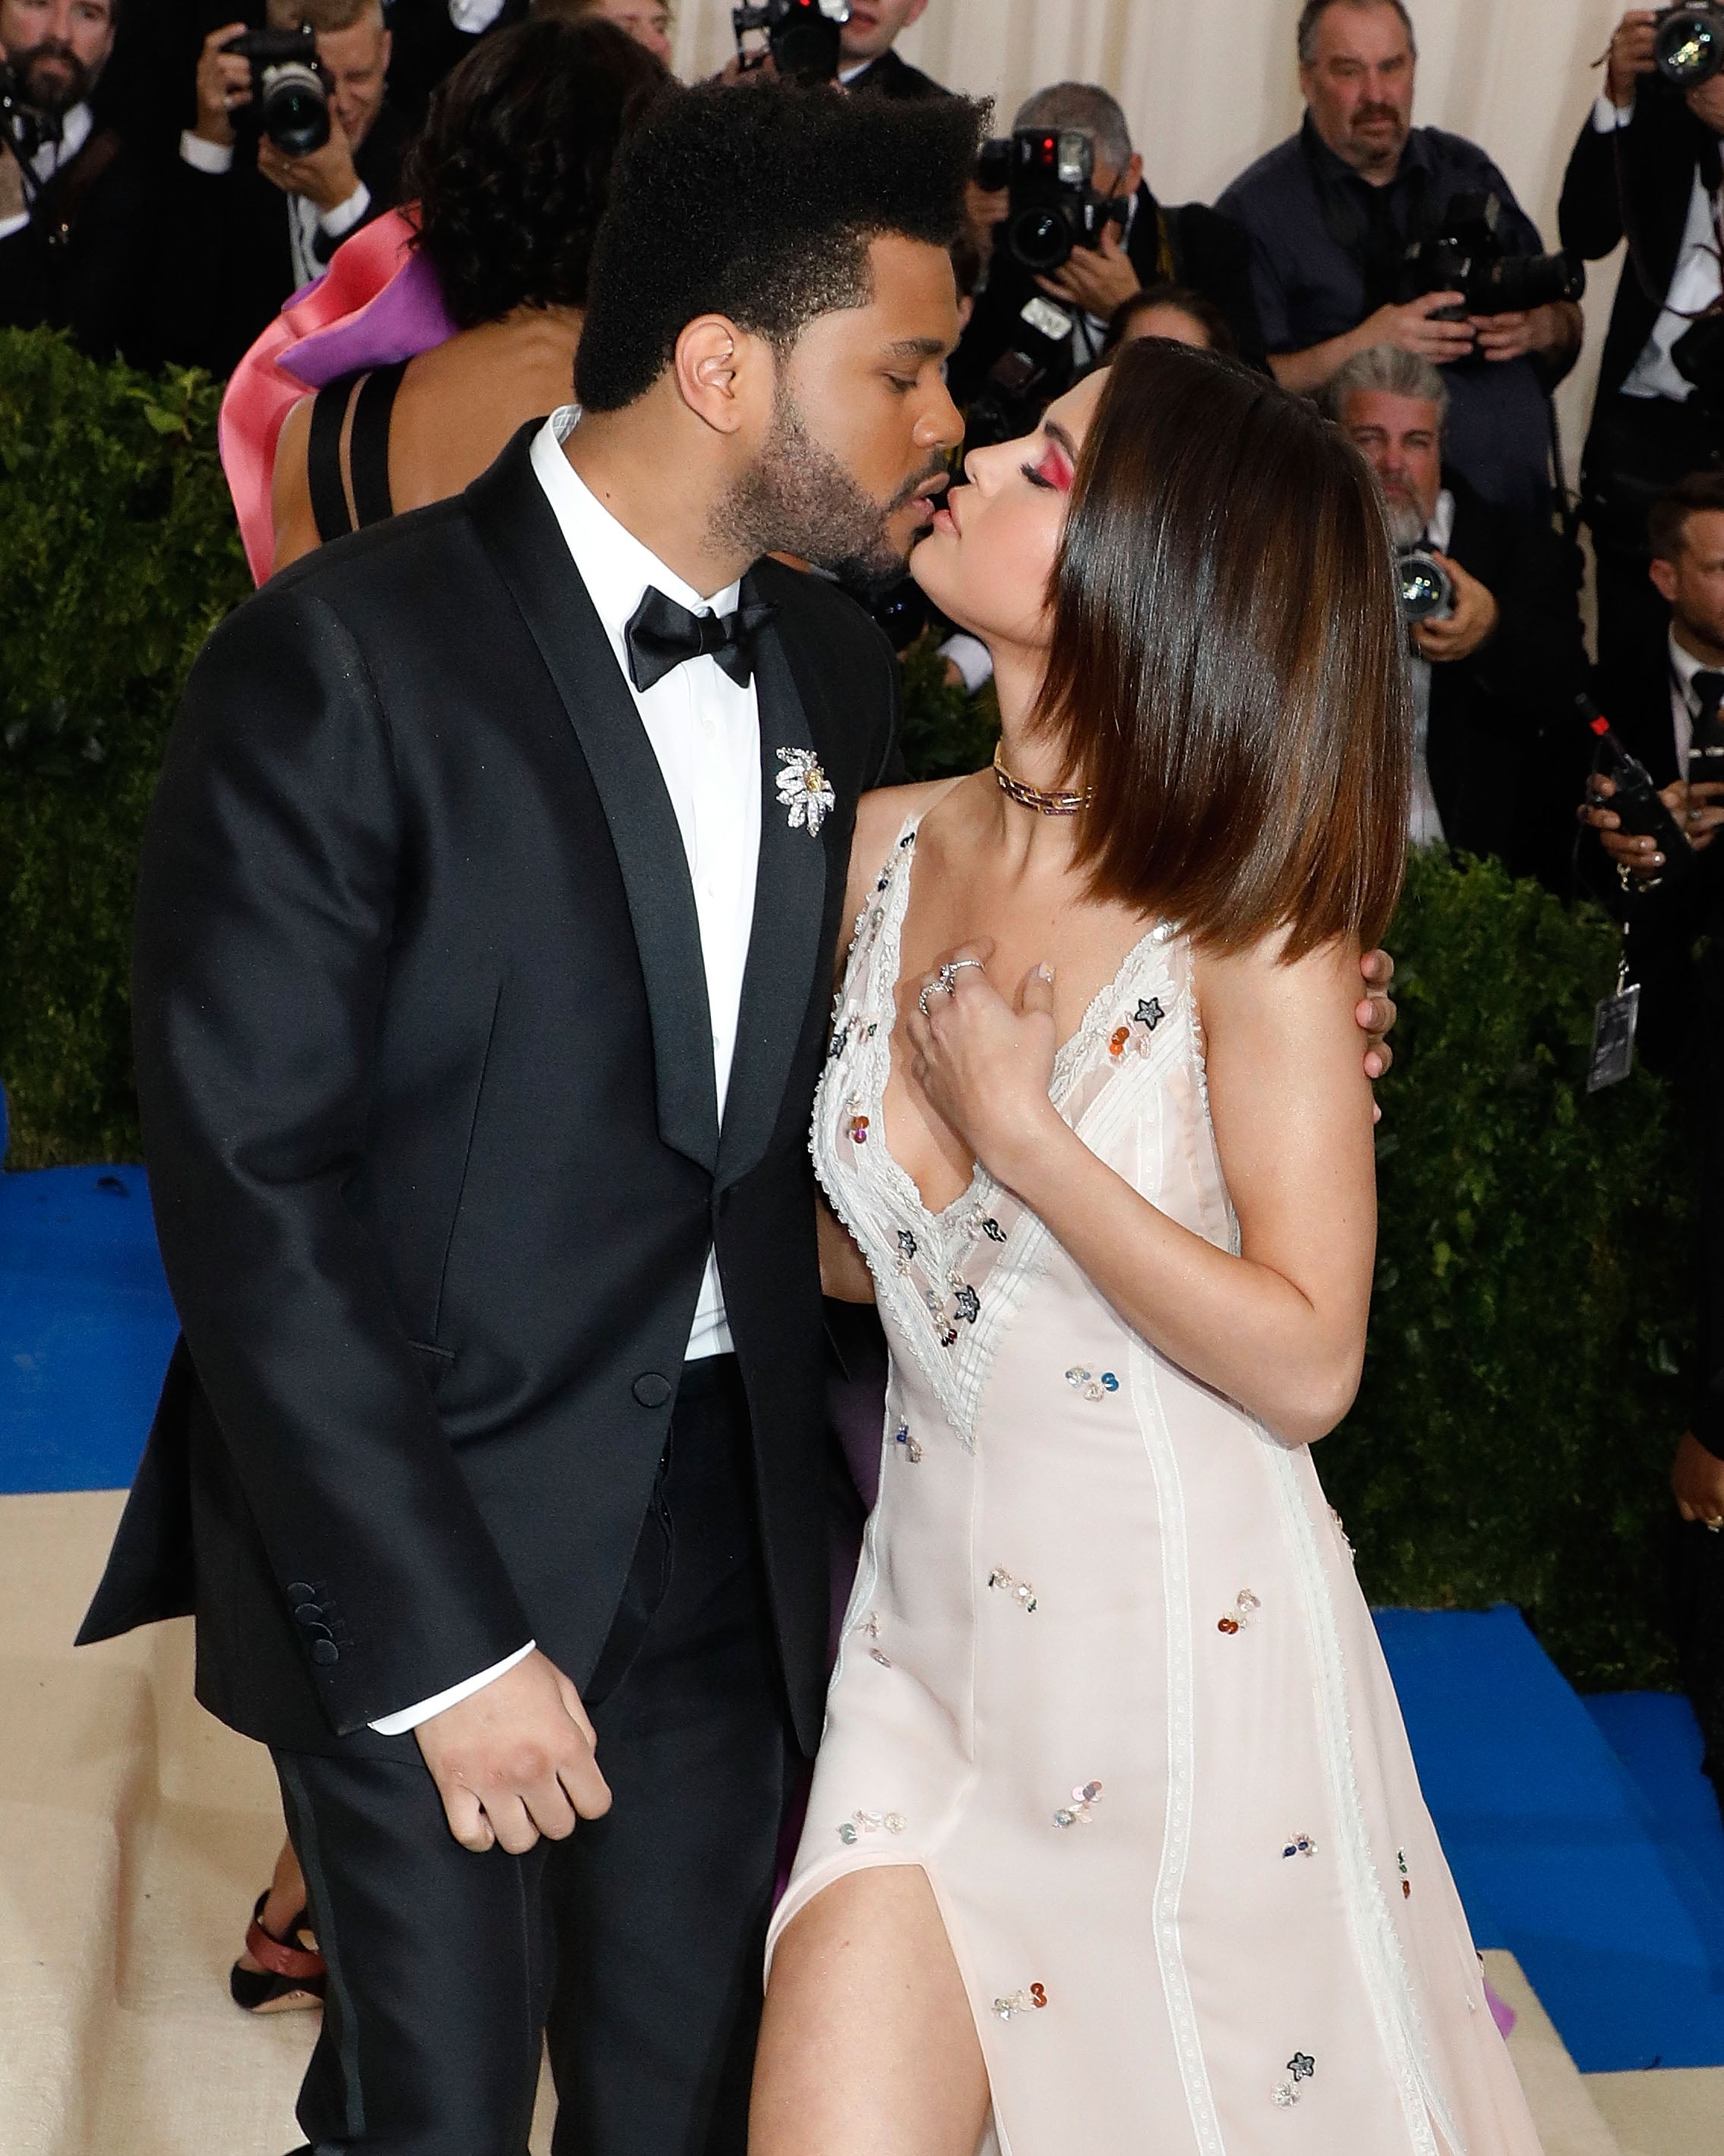 Selena Gomez looks loved up with The Weeknd at Disneyland